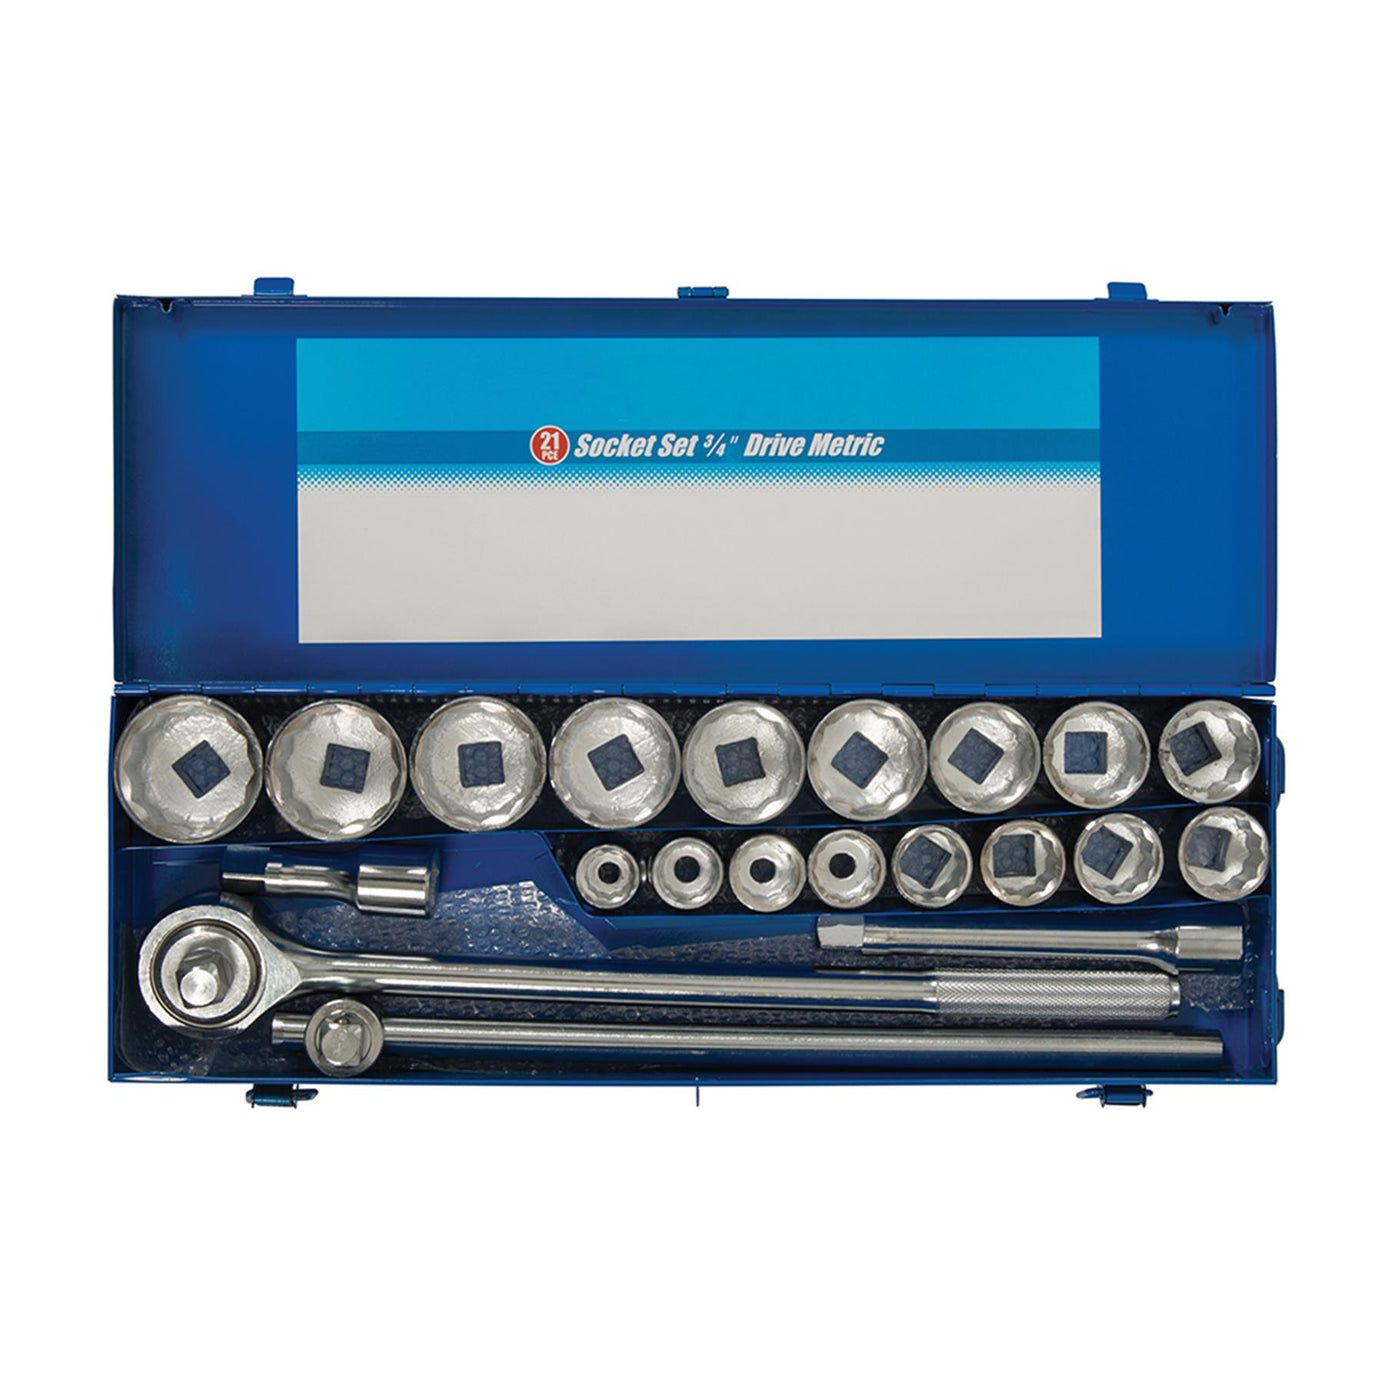 Socket Set 3/4" Drive Metric Wrench 21Pce 19-50mm Hand Tools High Quality